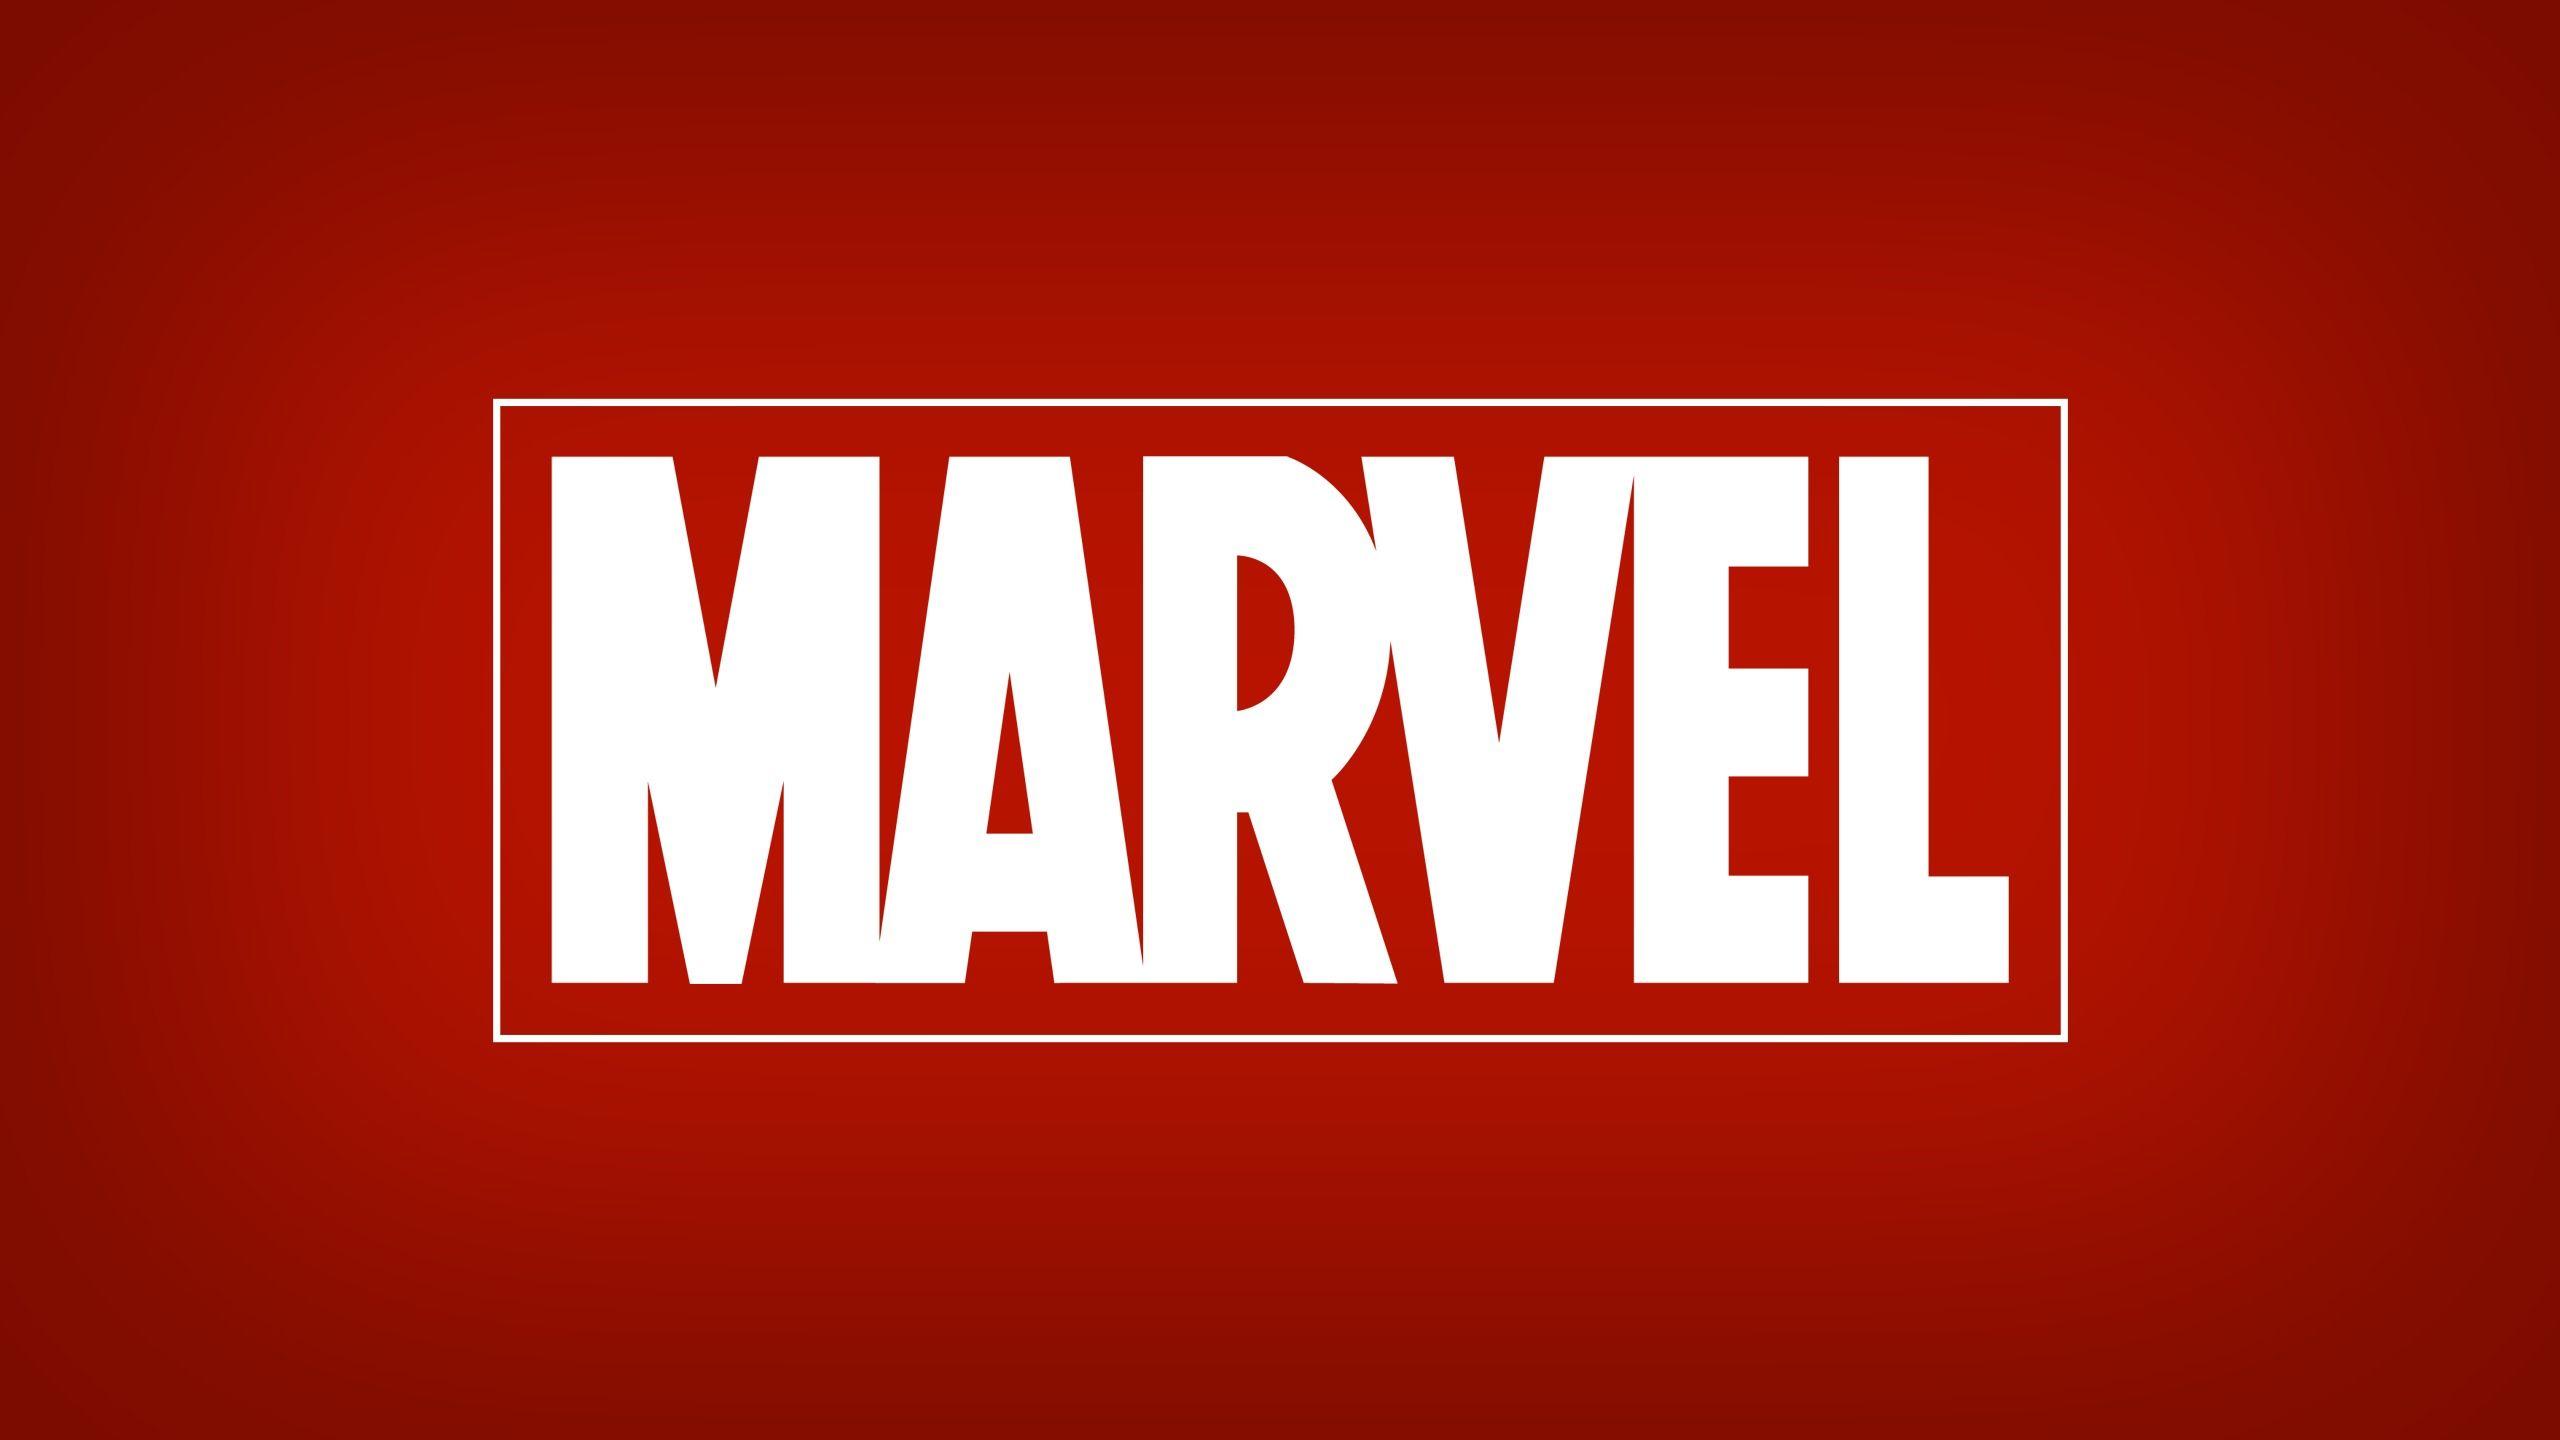 Marvel is bringing its superheroes to Virtual Reality with a new